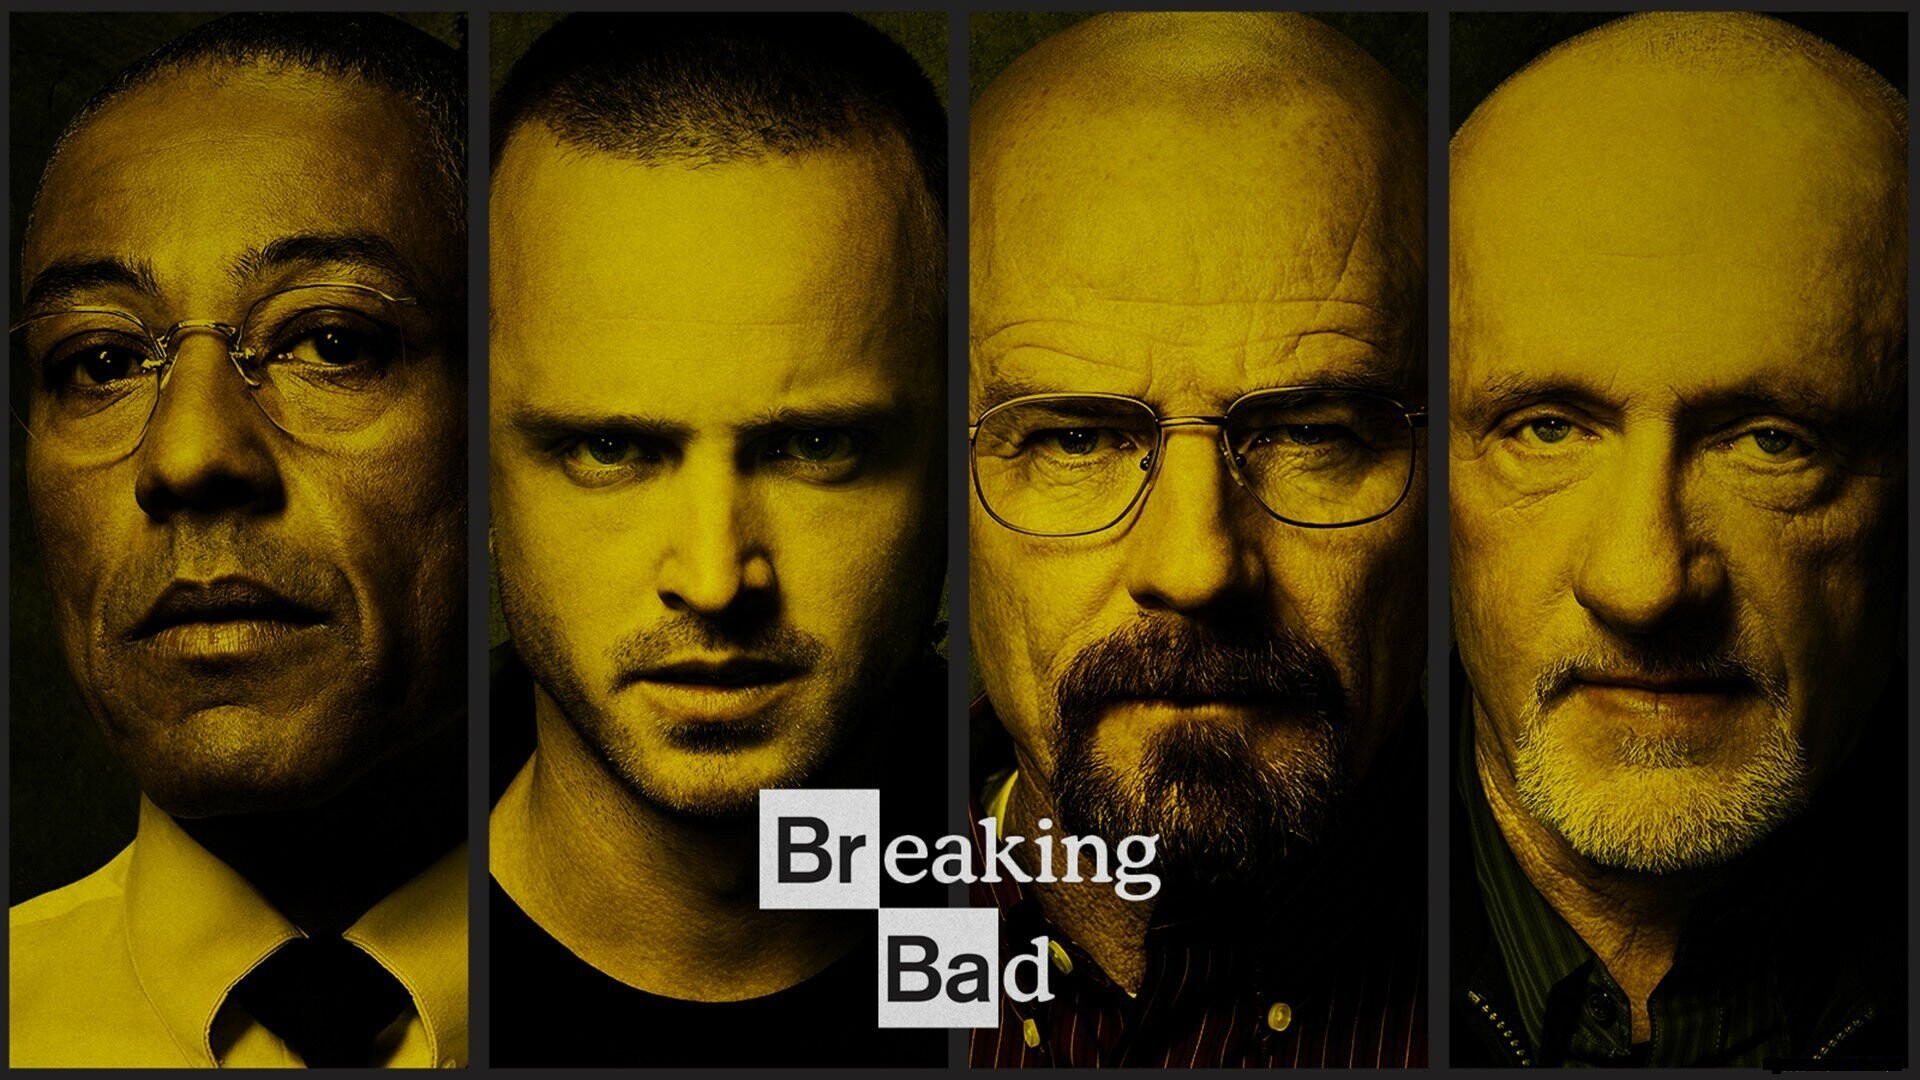 Breaking Bad: An iconic AMC drama, Featured in the Guinness World Records 2014 edition as the “highest rated TV series”. 1920x1080 Full HD Background.